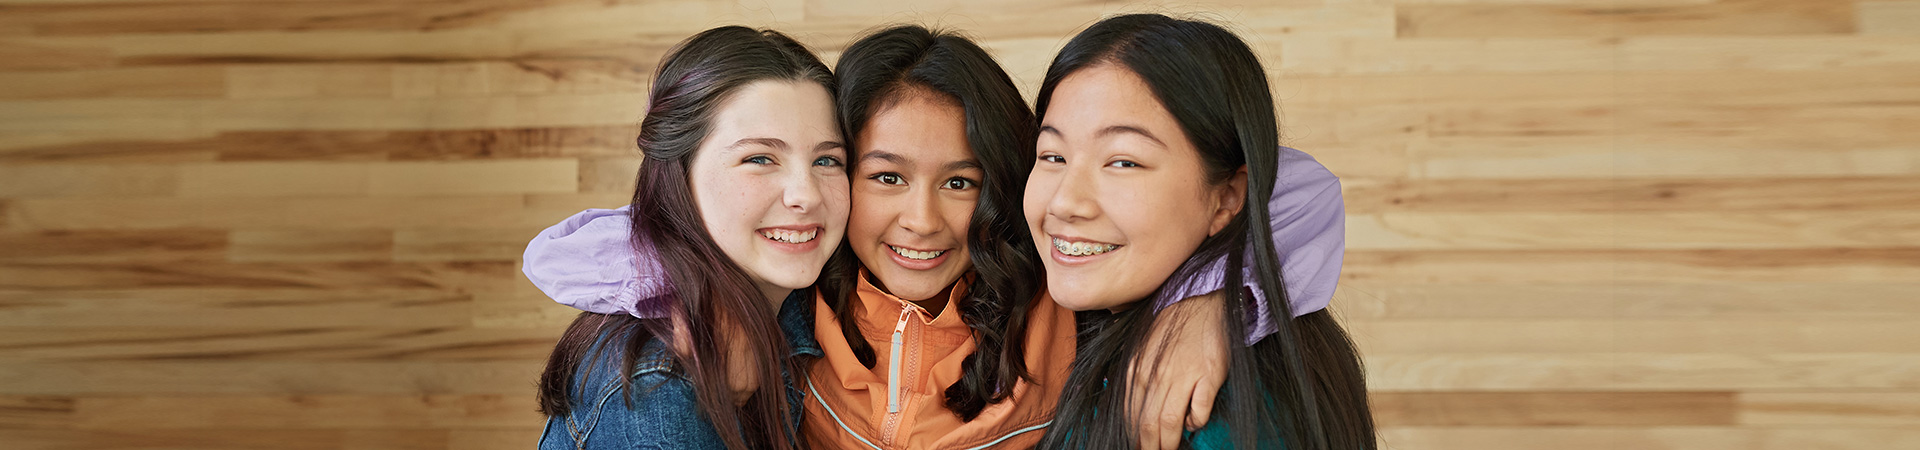  Portrait of three teenage girls. The middle girl has her arms around the necks of the other two in a hug. All three are smiling. 